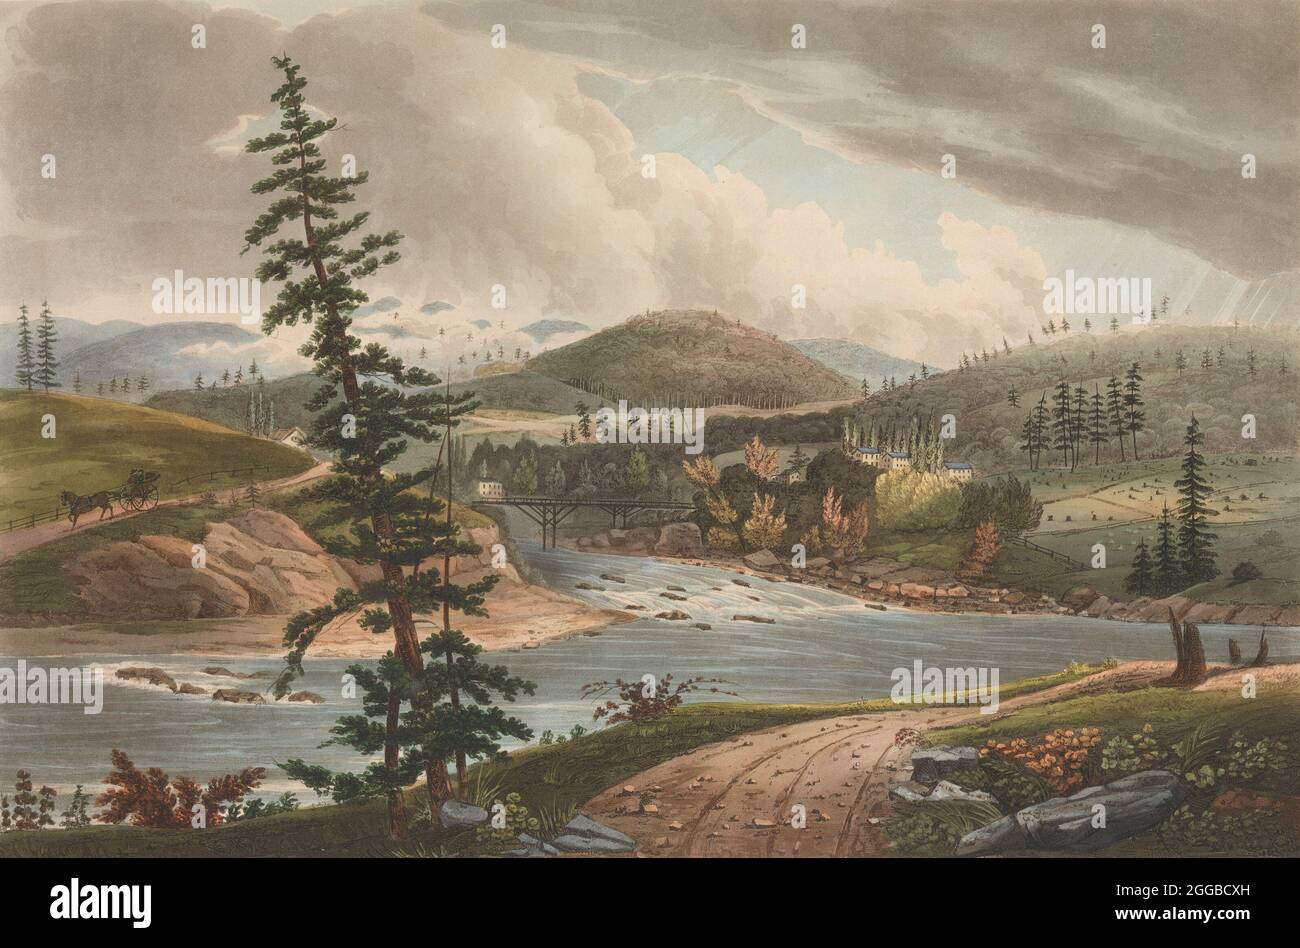 Junction of the Sacandaga and Hudson Rivers (No. 2 of The Hudson River Portfolio), 1821-22. Stock Photo